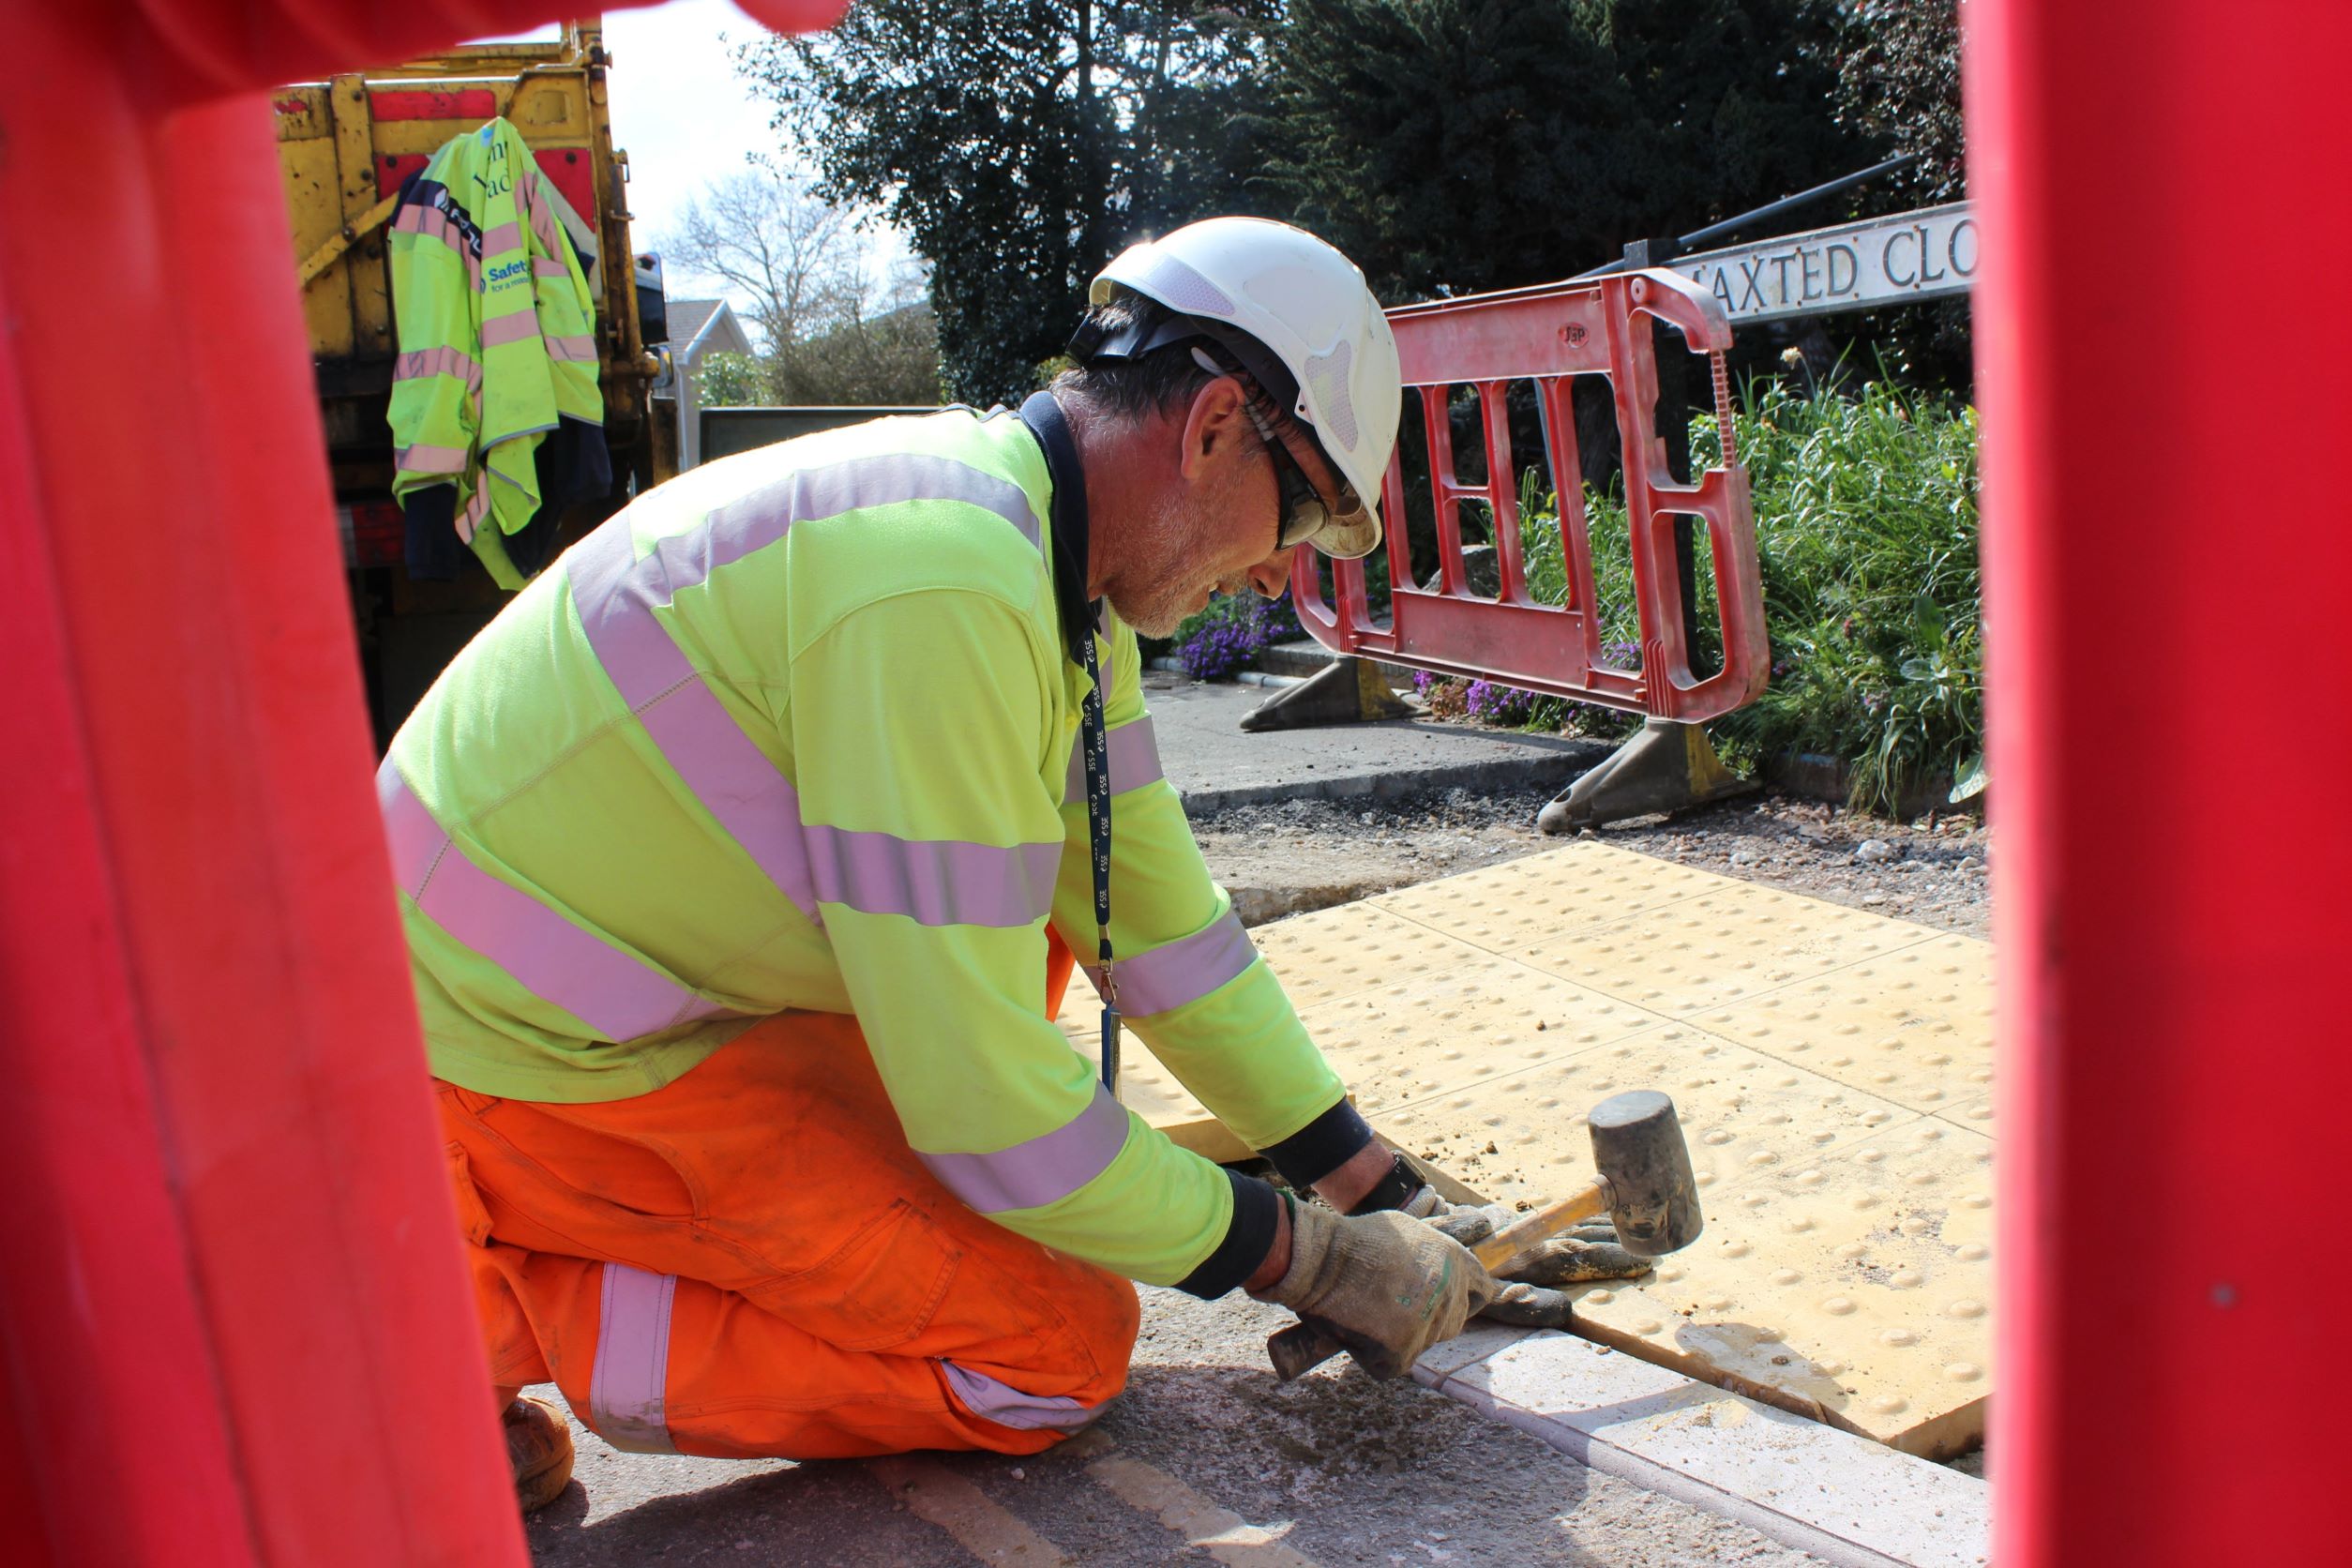 An Island Roads worker installing a dropped access kerb in Maxted Close, Cowes.